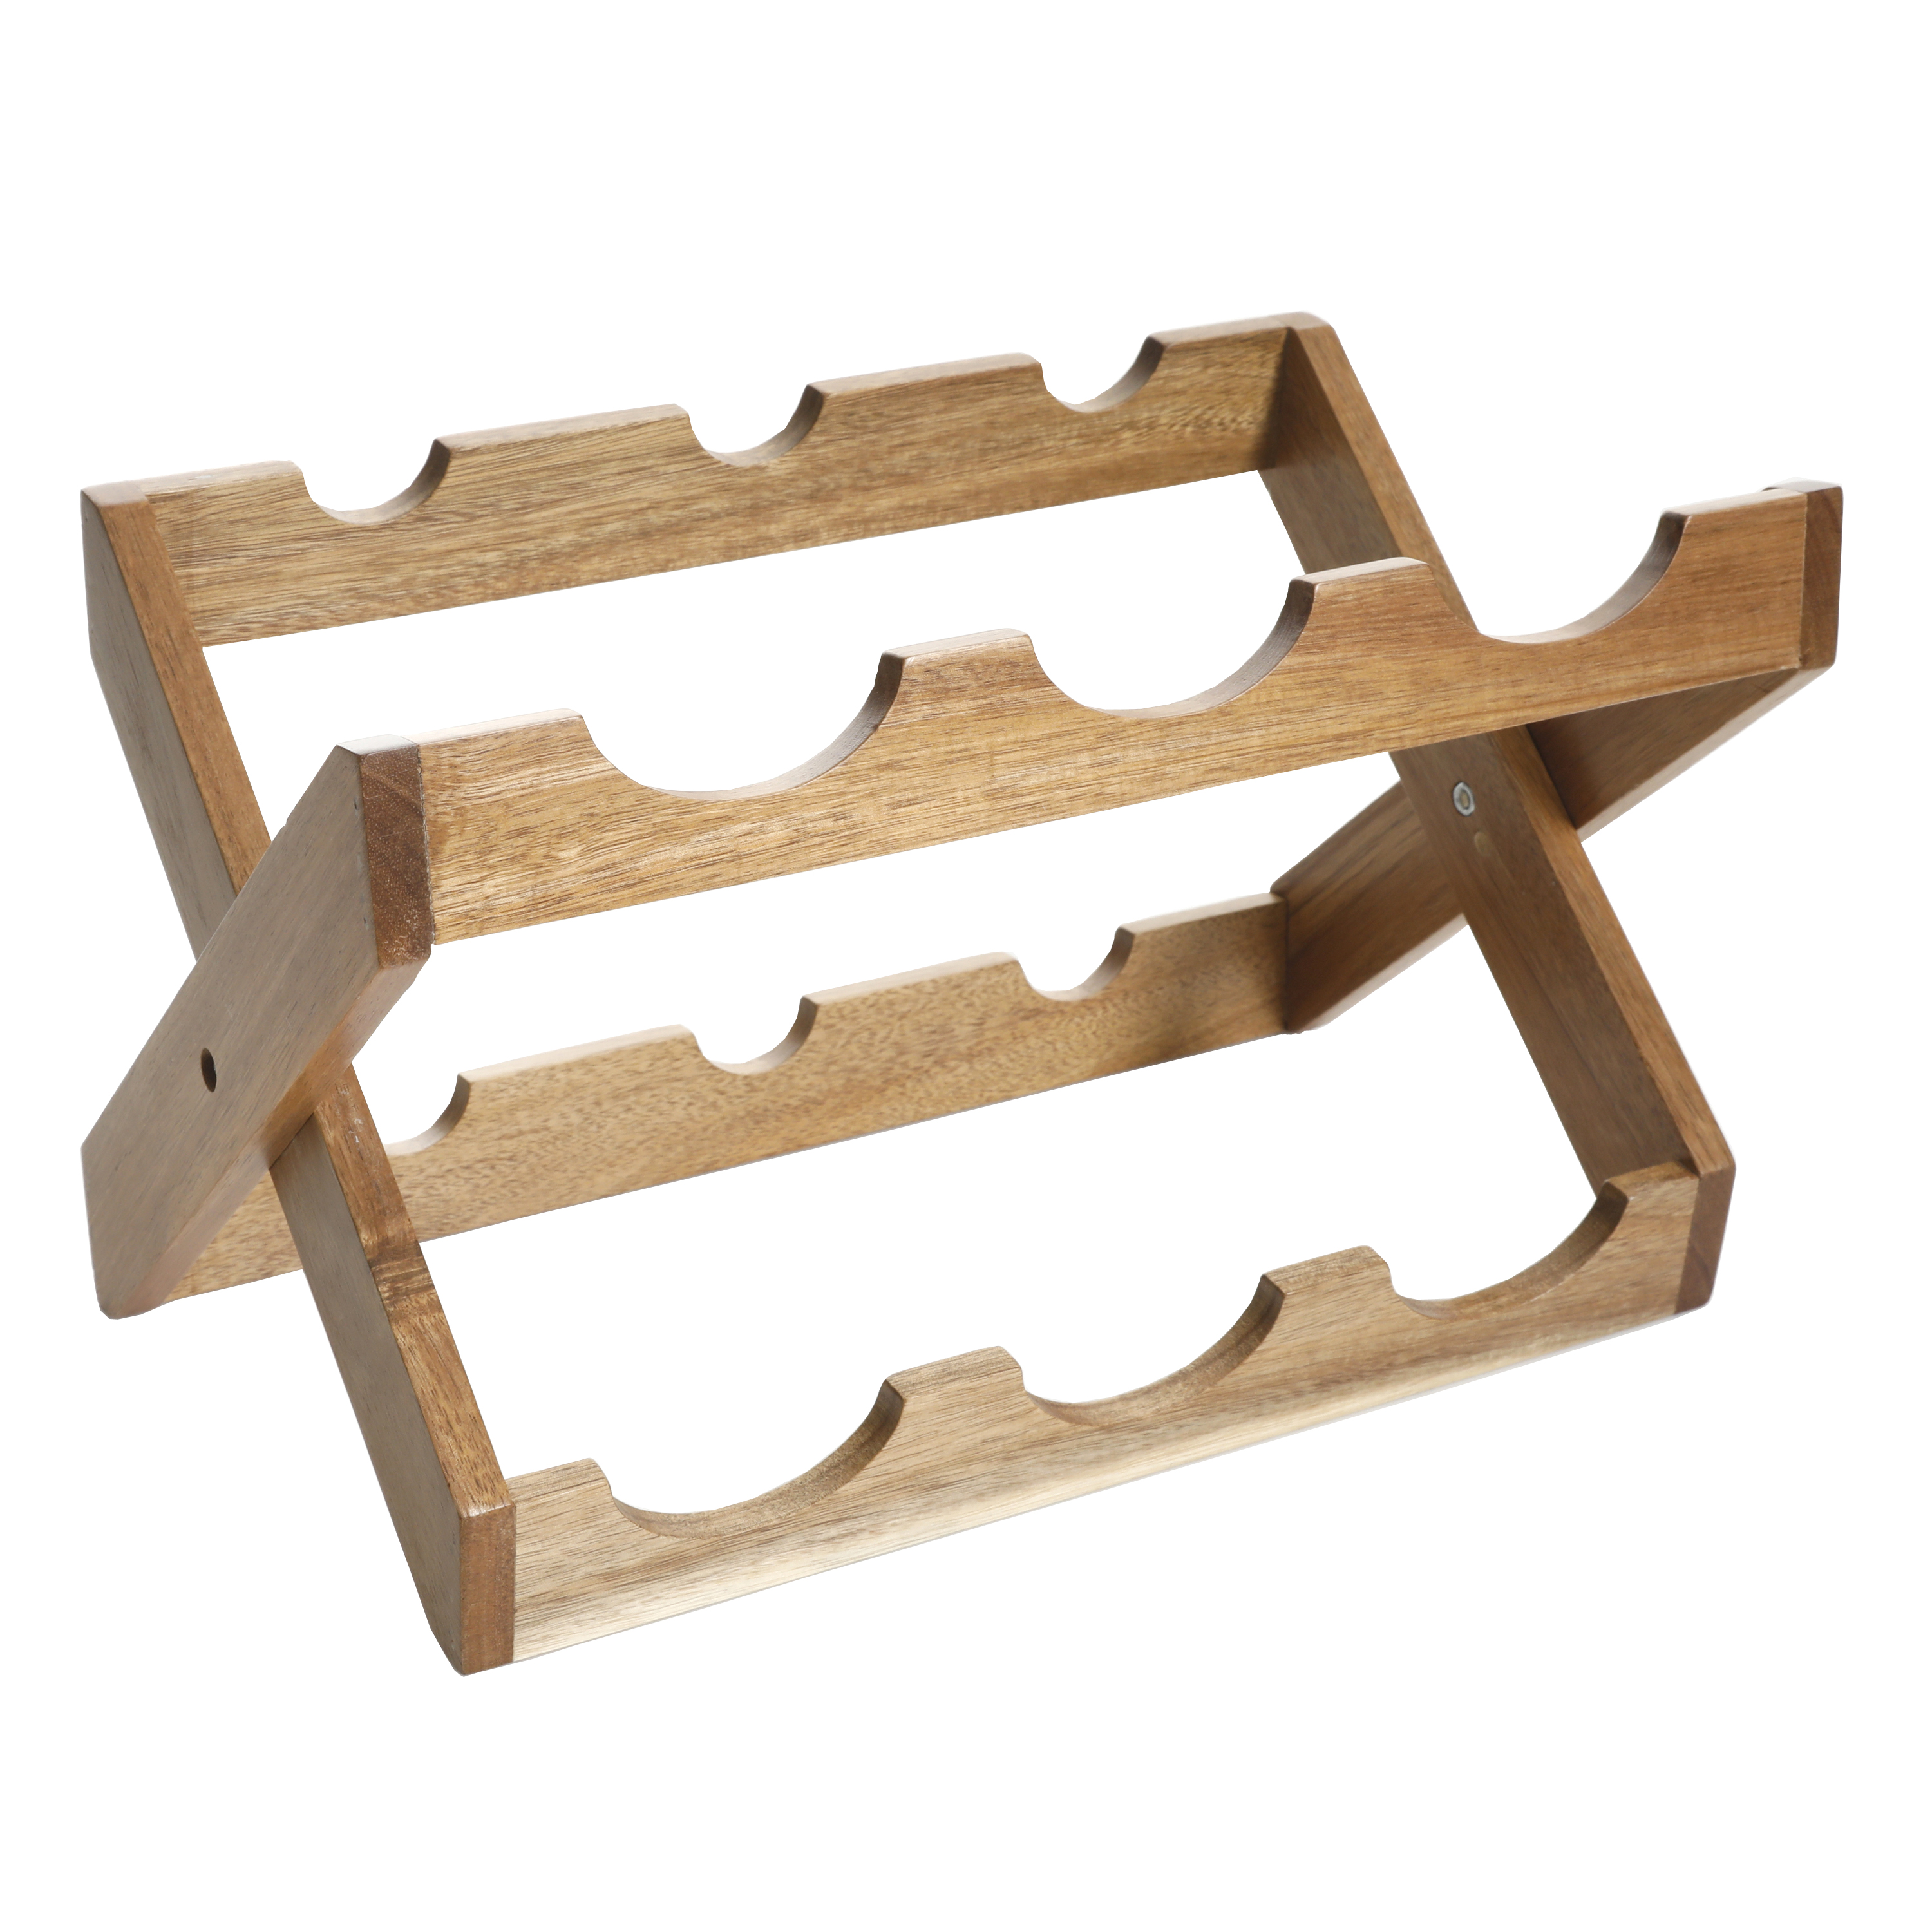 The Pioneer Woman Spring Bouquet 13.9-inch Acacia Wood Wine Rack - image 3 of 6